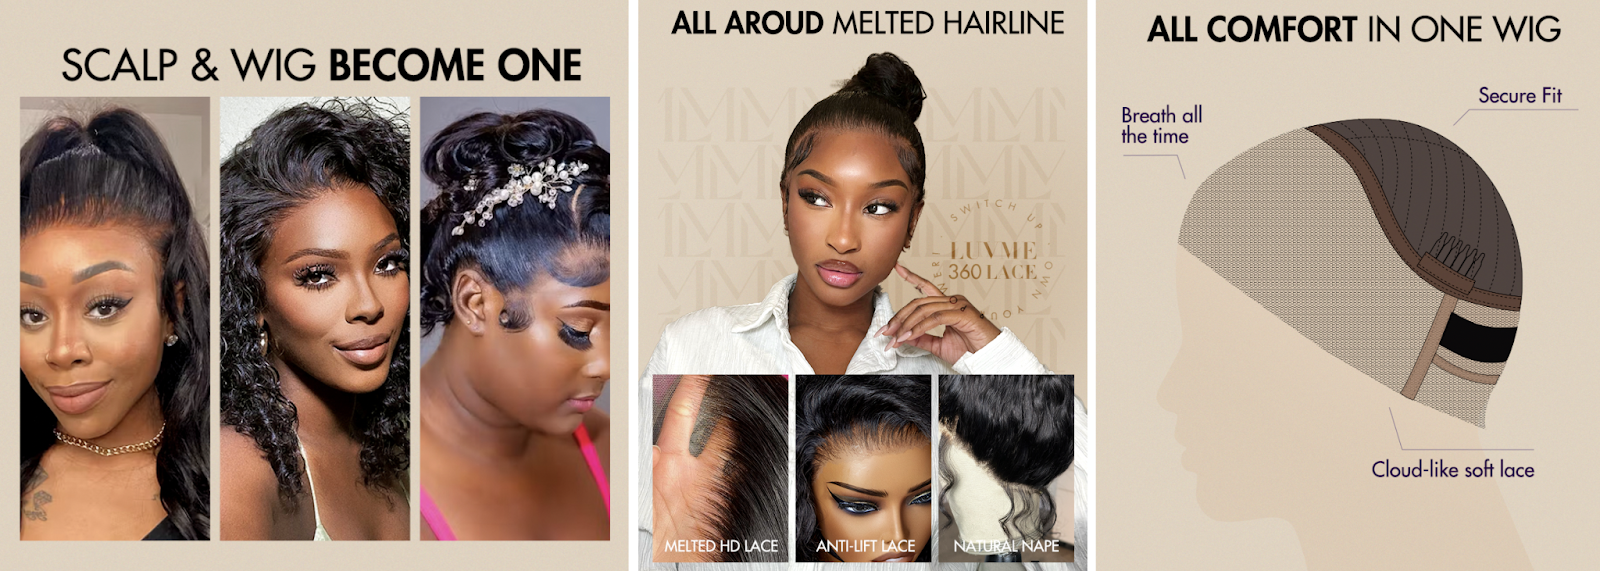 BizWire Express > - Luvme Hair Introduces Versatile 360/Full Lace Wig  Collection